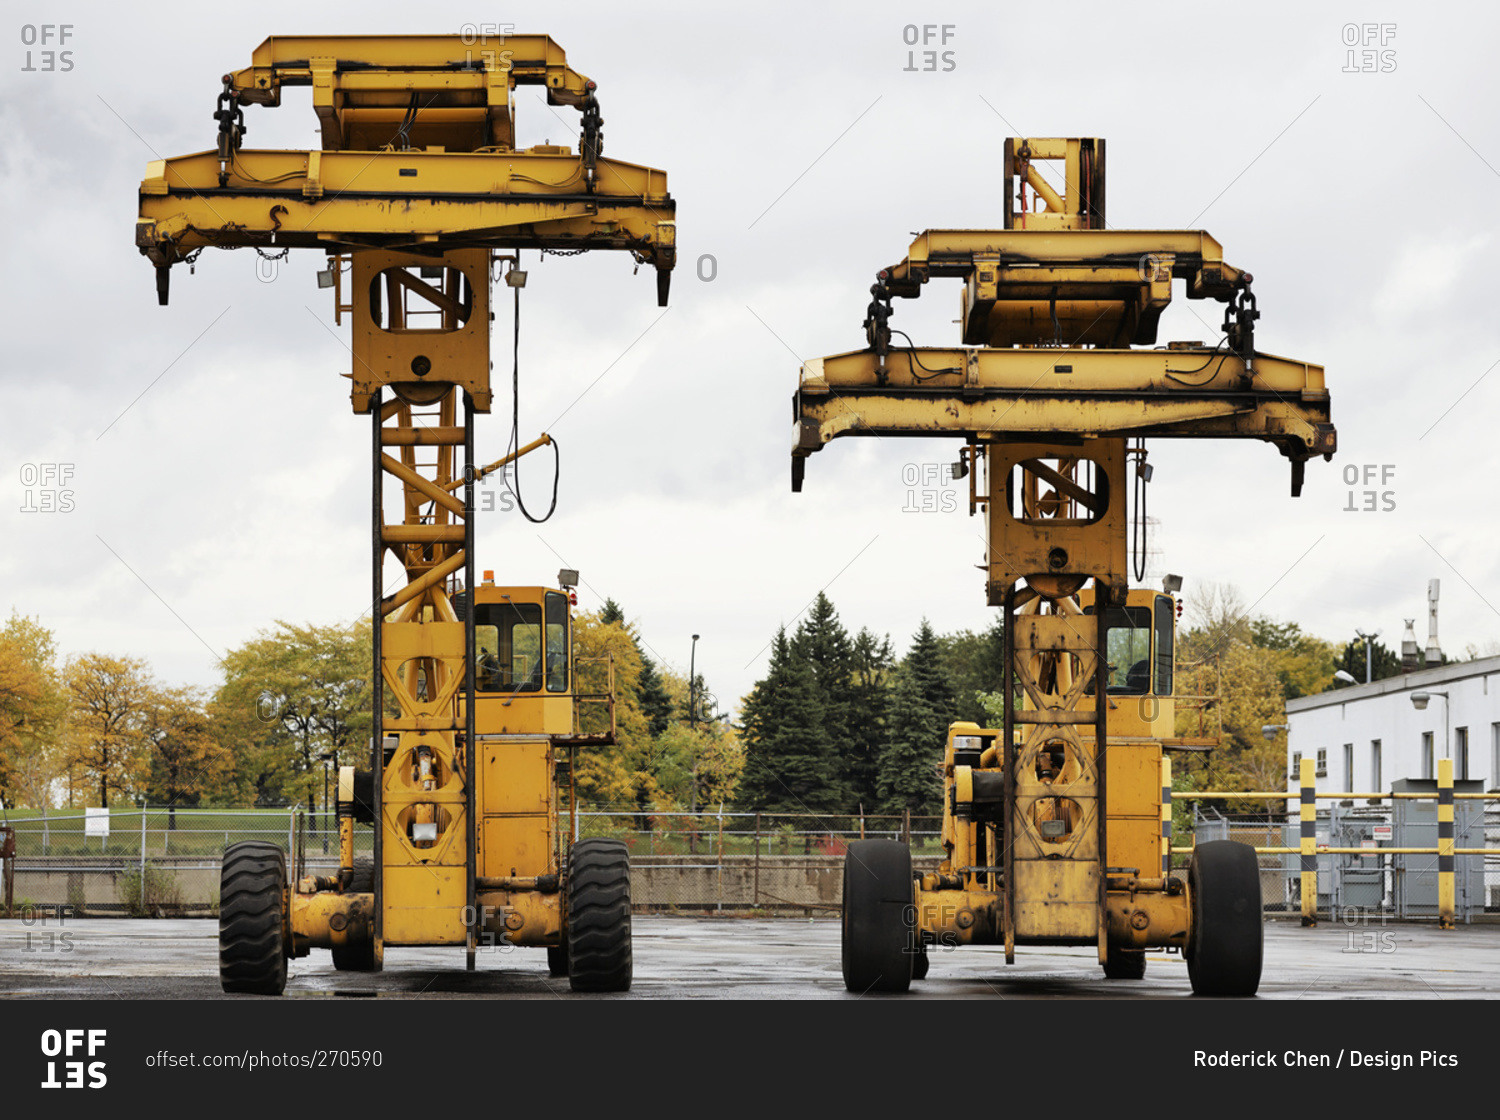 Fork Lifts at Bickerdike Port in Old Montreal, Montreal, Quebec, Canada